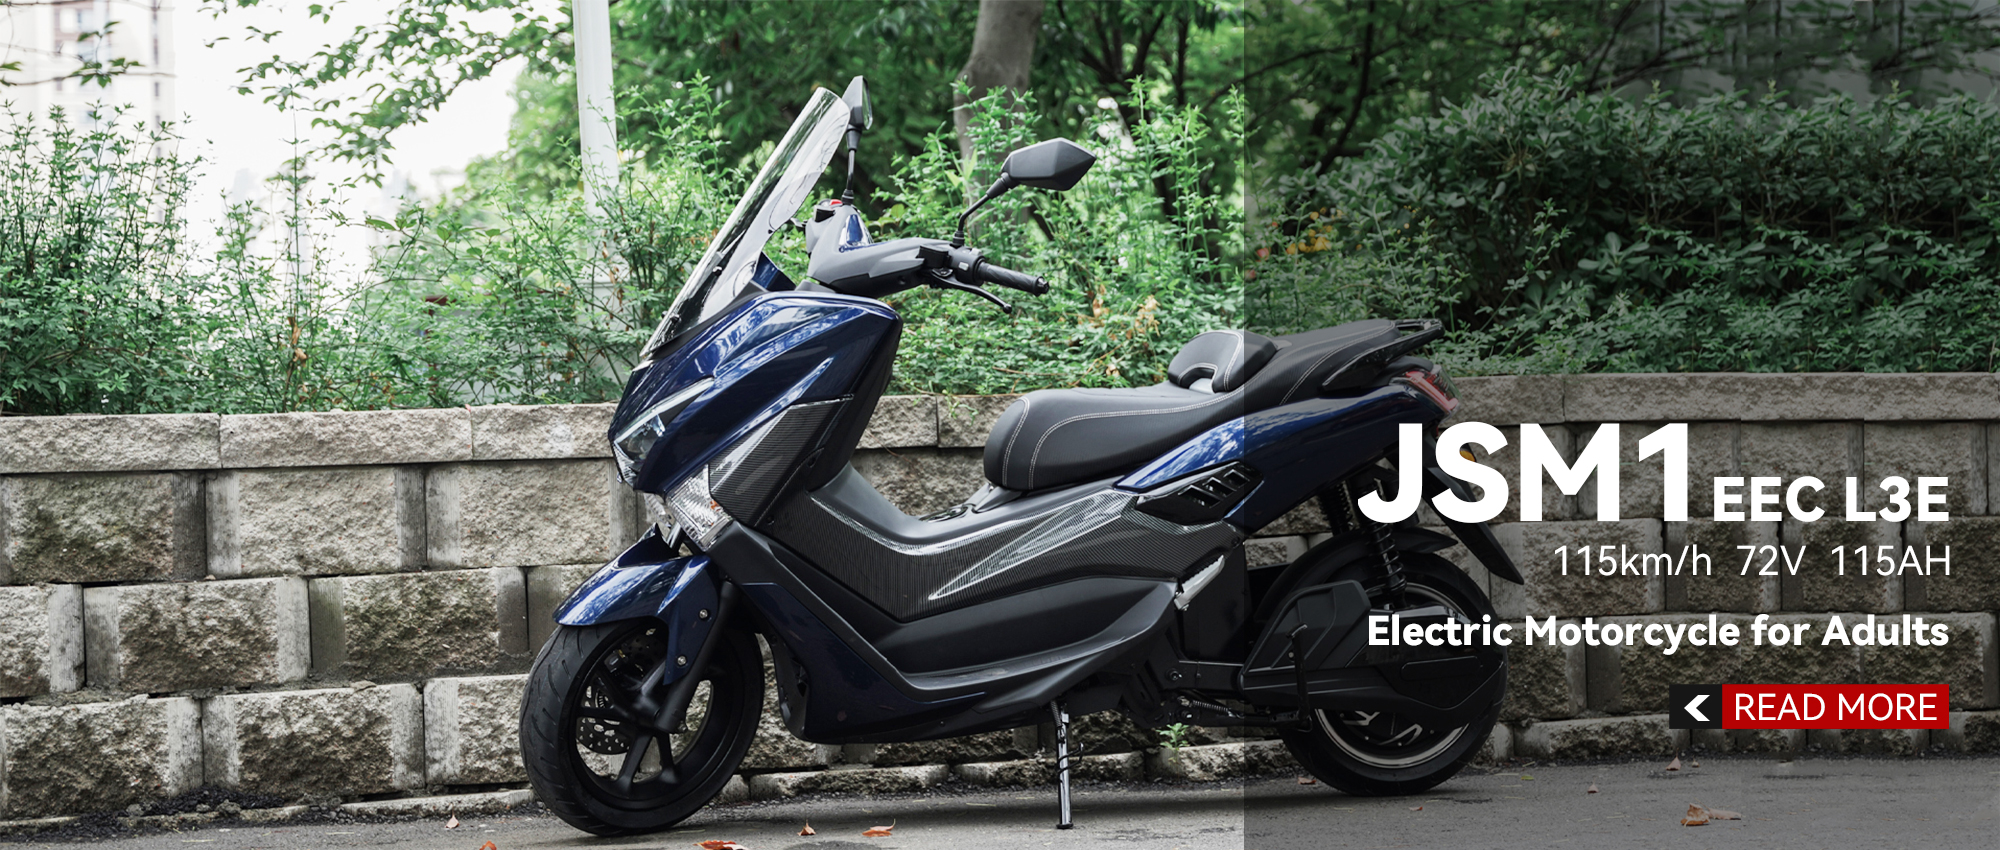 JSM1 EEC L3E Electric Motorcycle for Adults